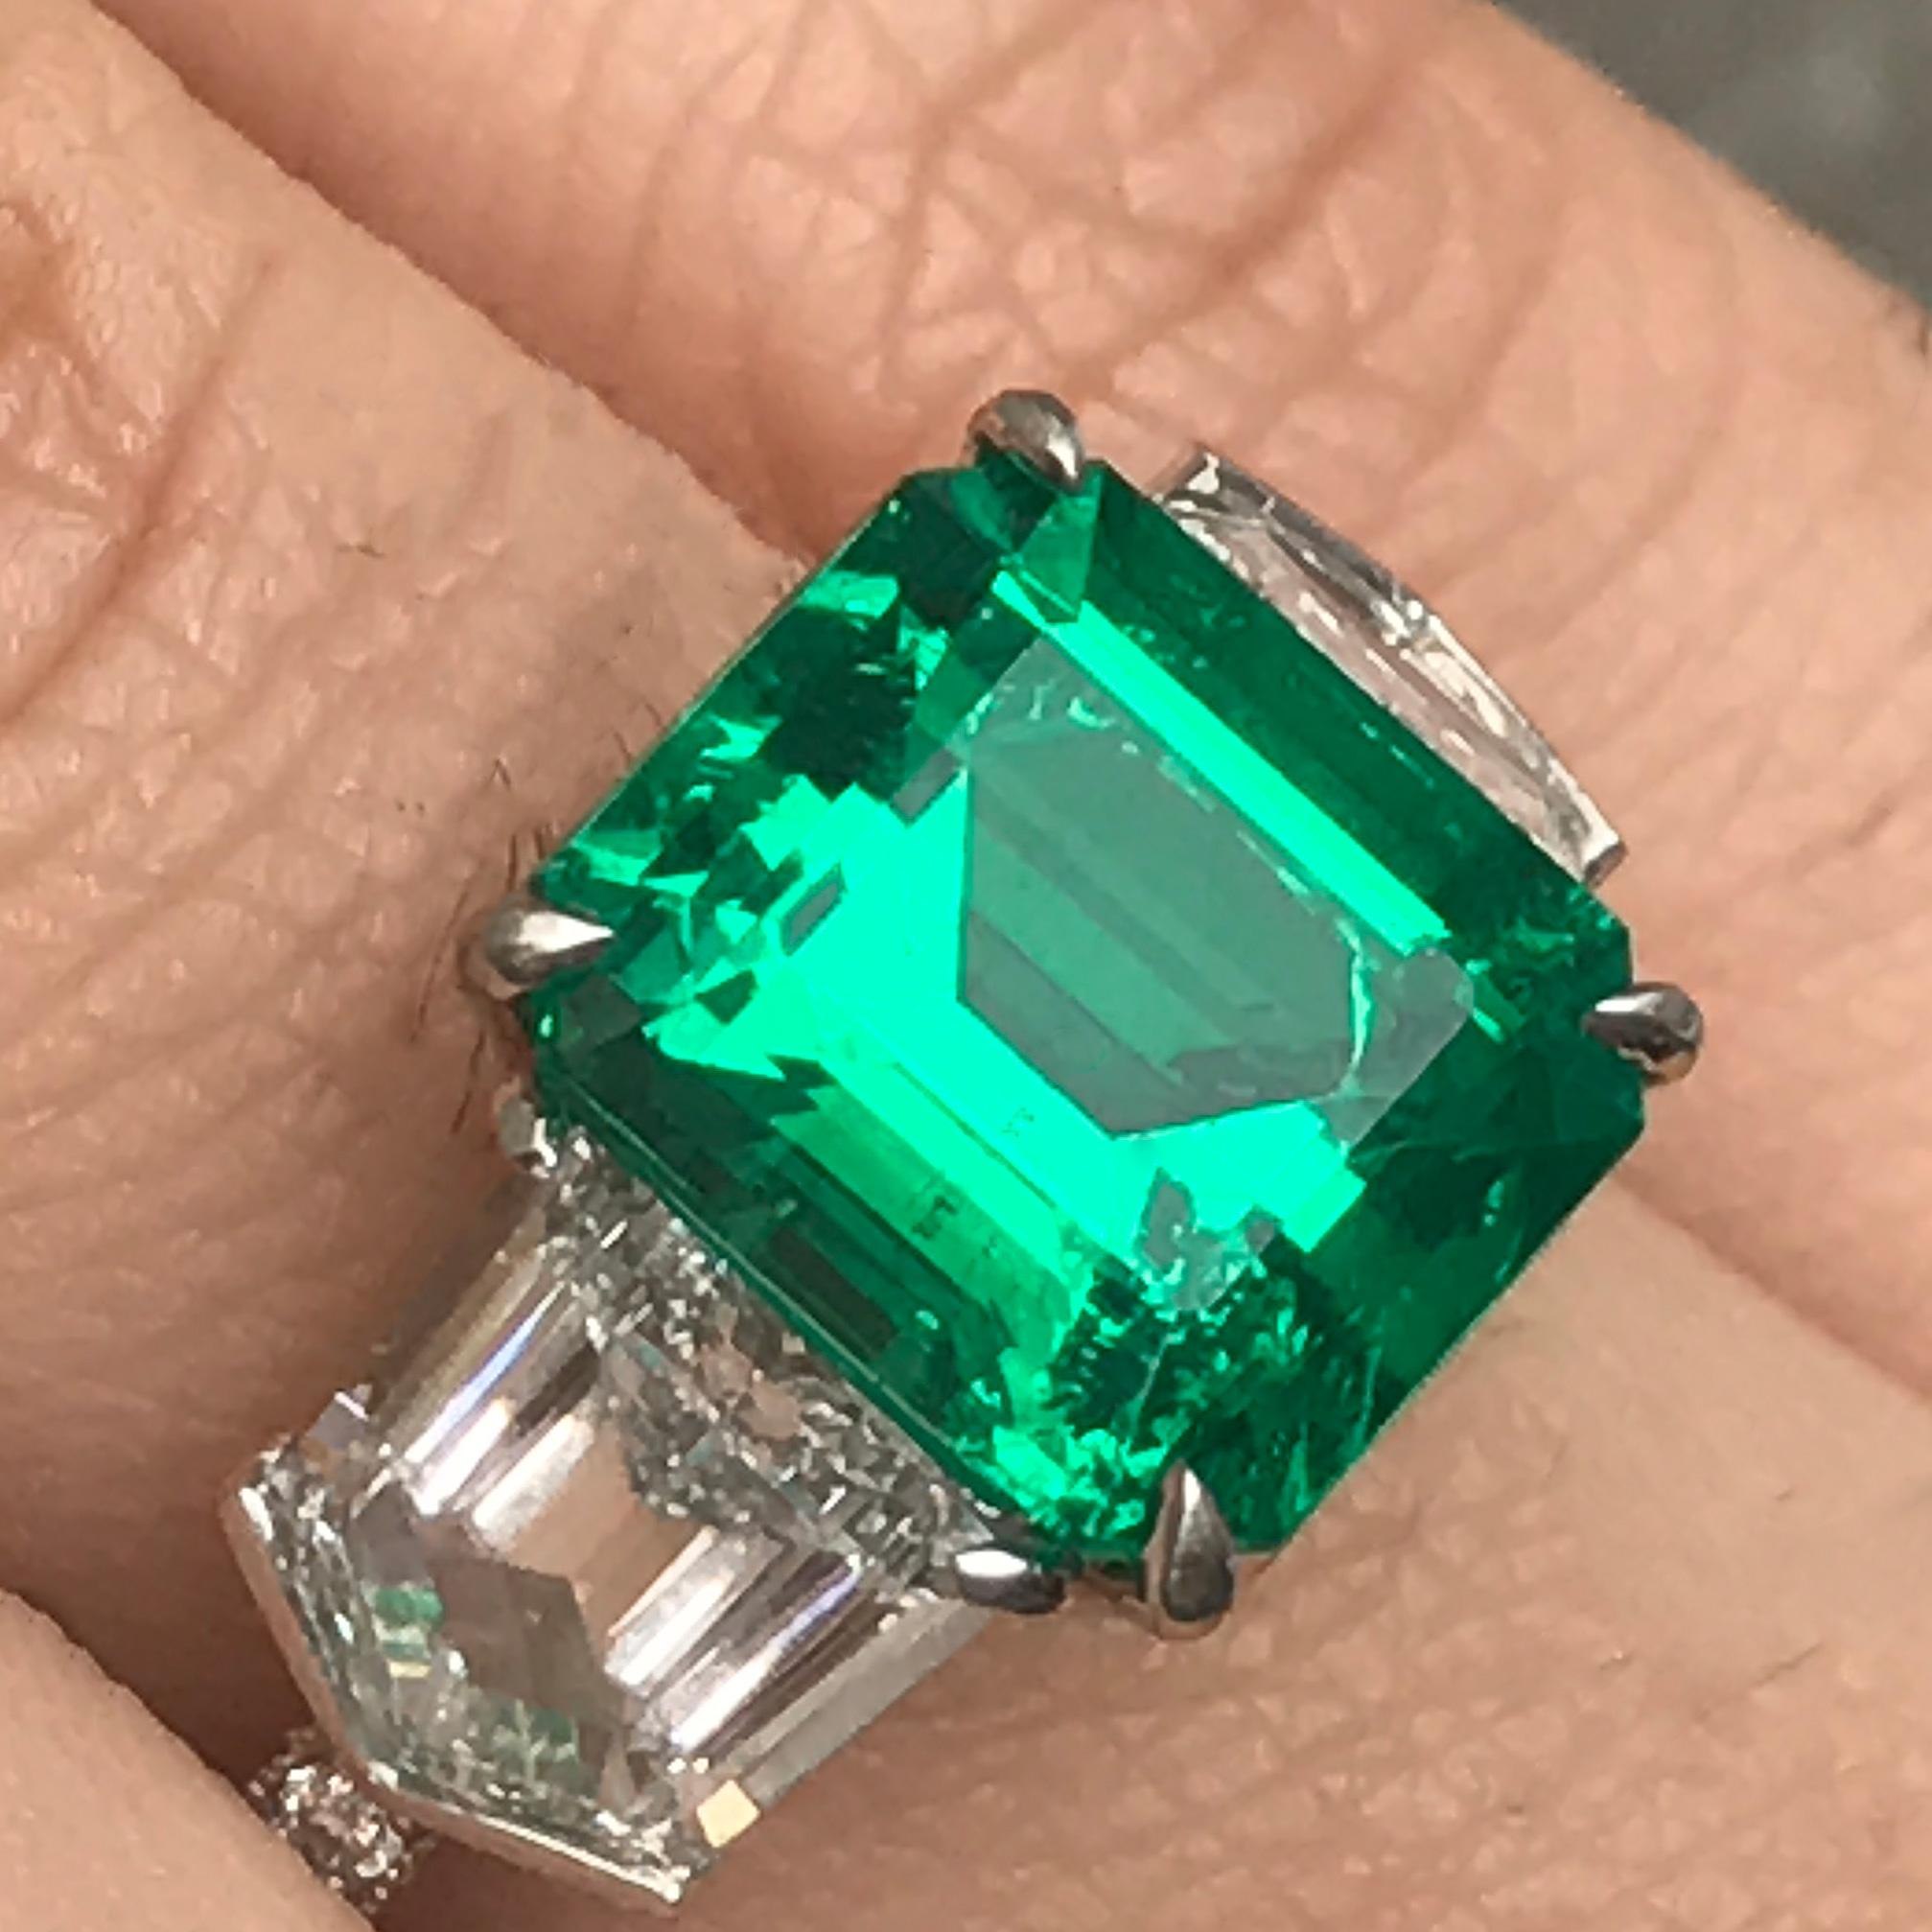 B8099001

Ring May be made to order from scratch to accommodate your exact finger size 
or a different stone if the budget requires it, takes approximately 3-6 weeks

Setting with no center stone can be purchased also.

Center Stone Emerald Details